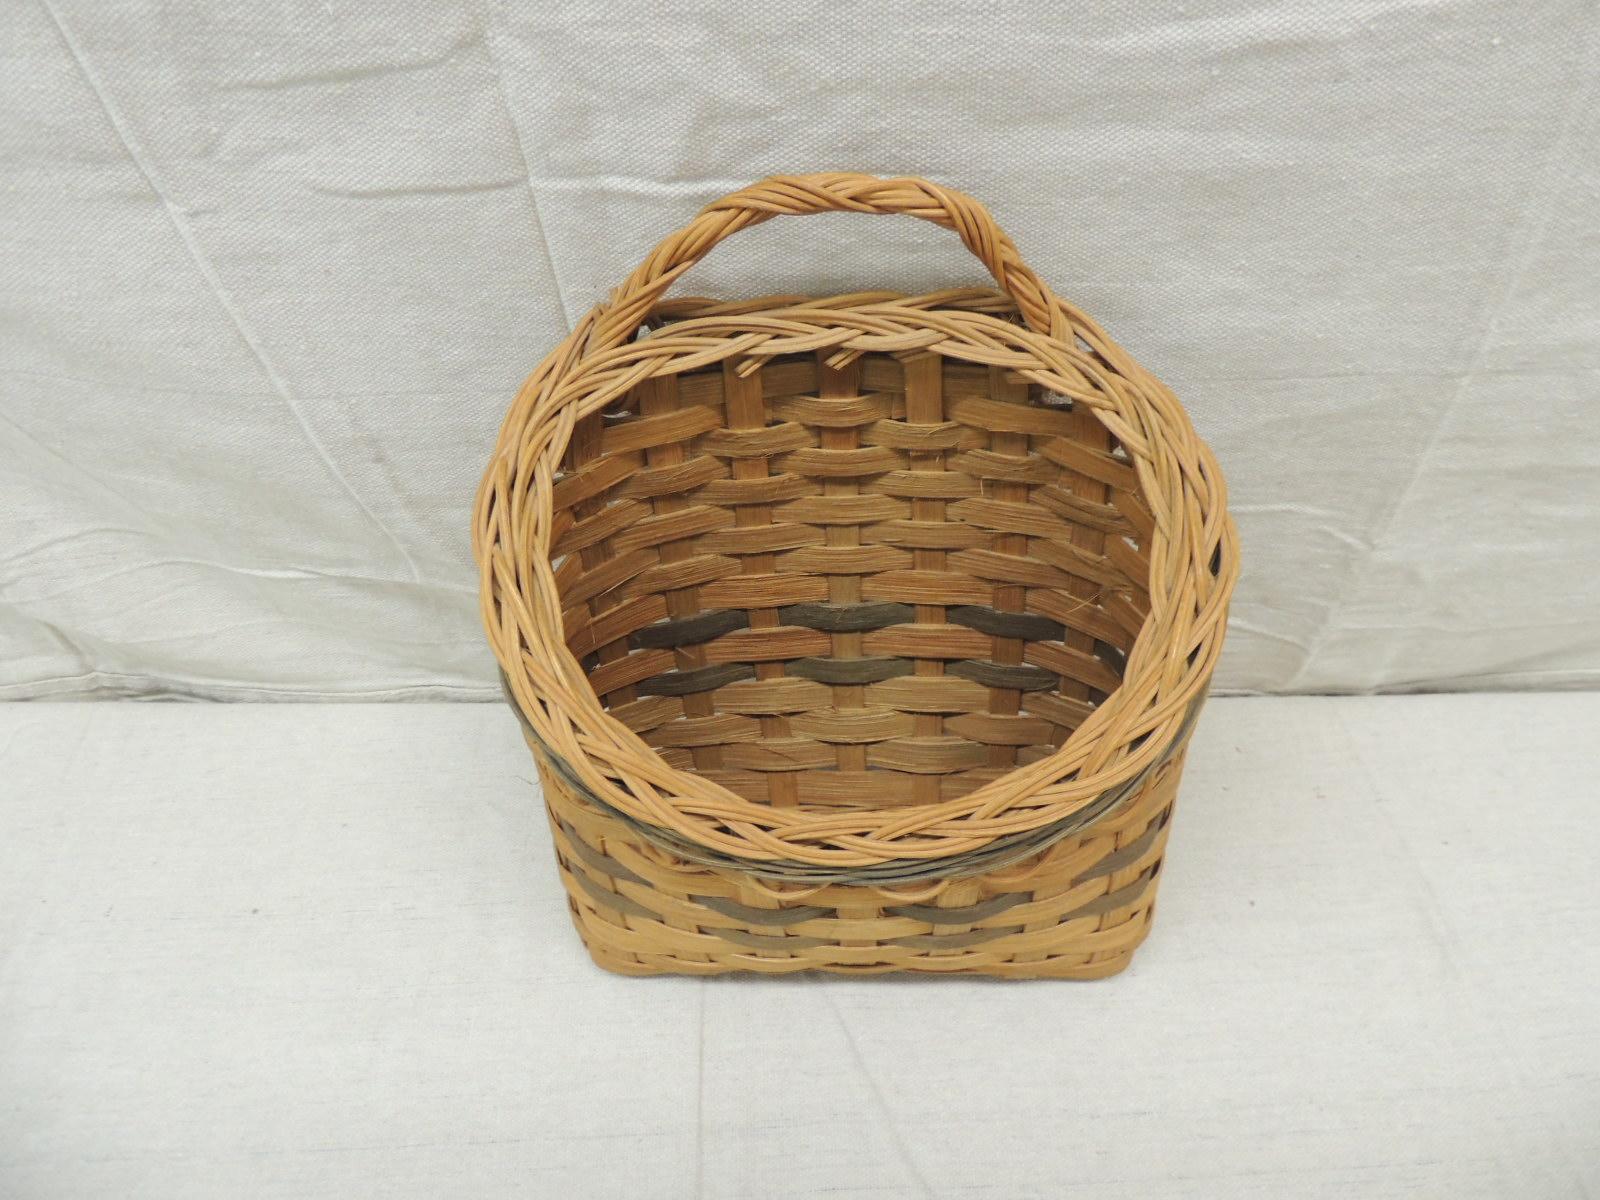 Vintage wall hanging decorative basket with handle.
Size: 9